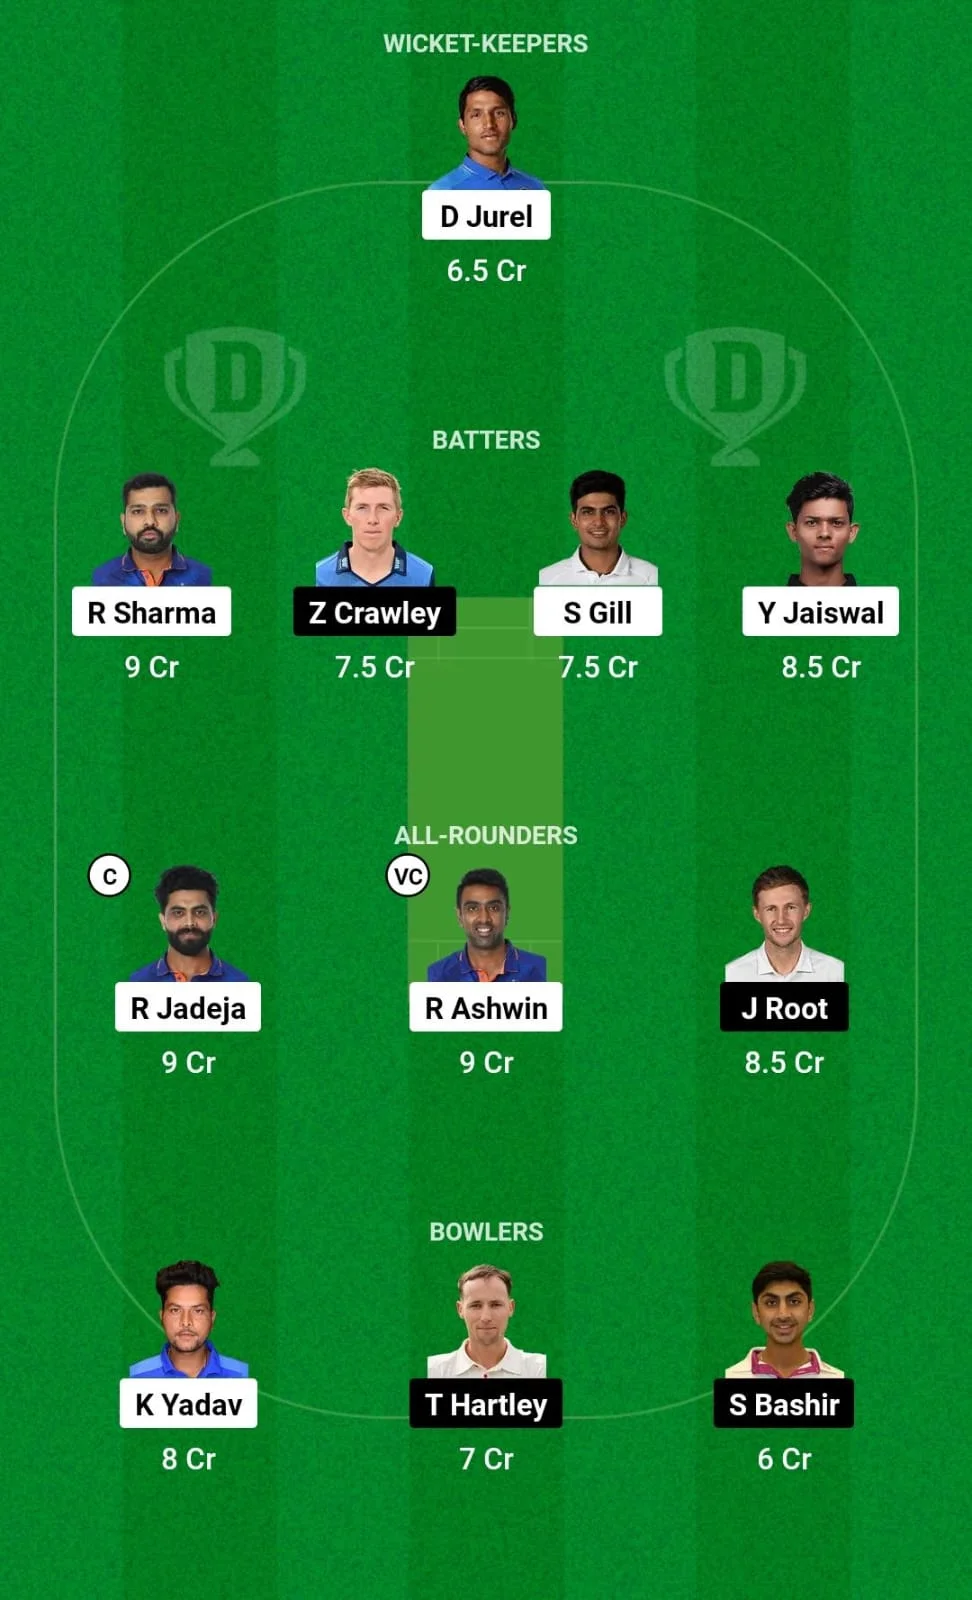 IND vs ENG Dream11 Prediction 5th Test